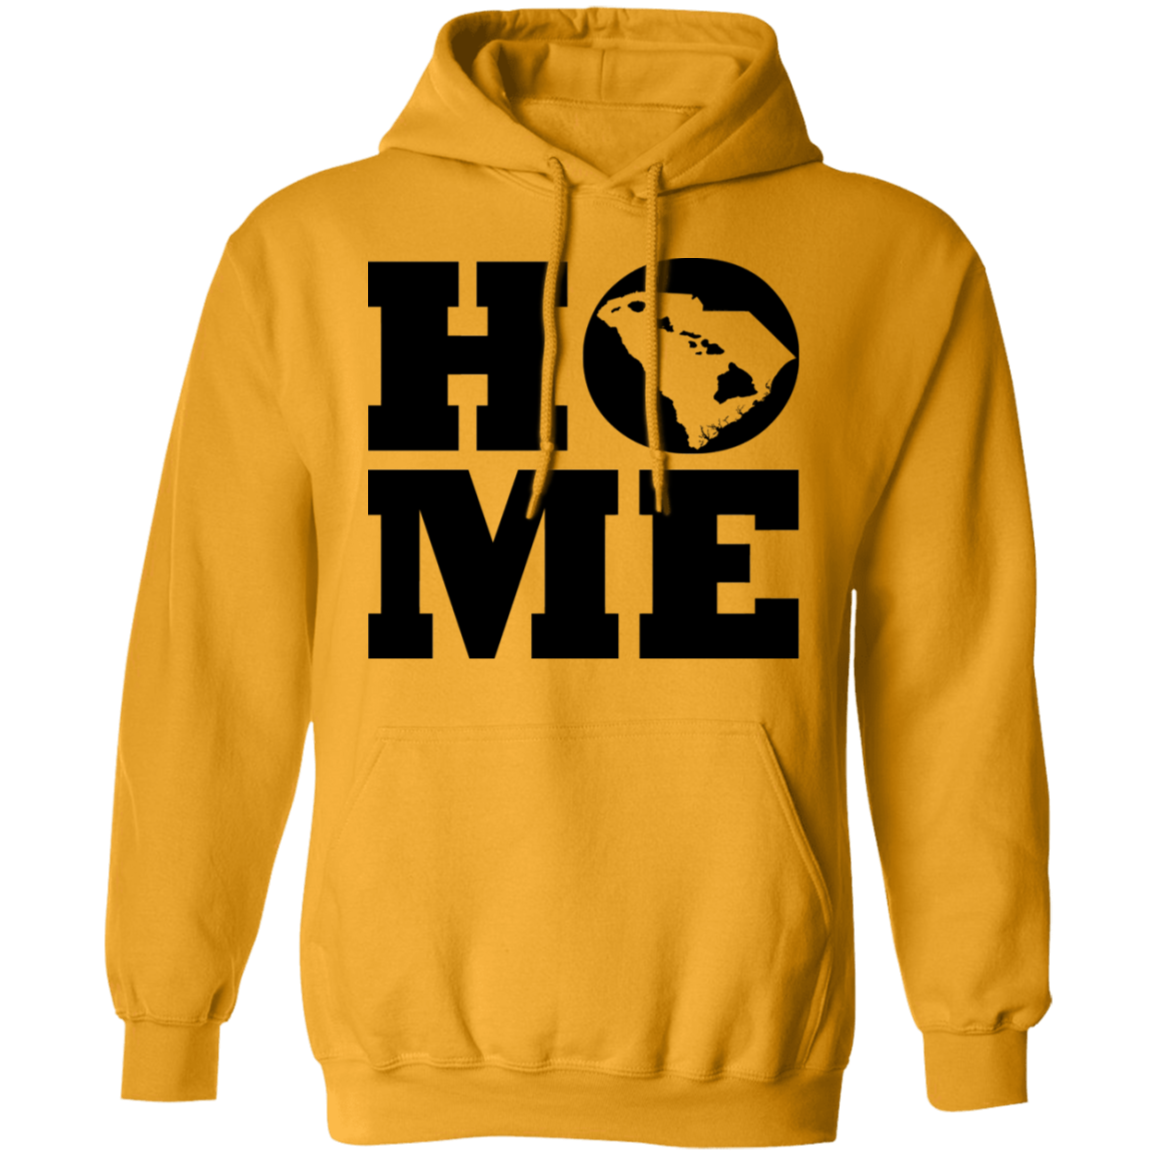 Home Roots Hawai'i and South Carolina Pullover Hoodie